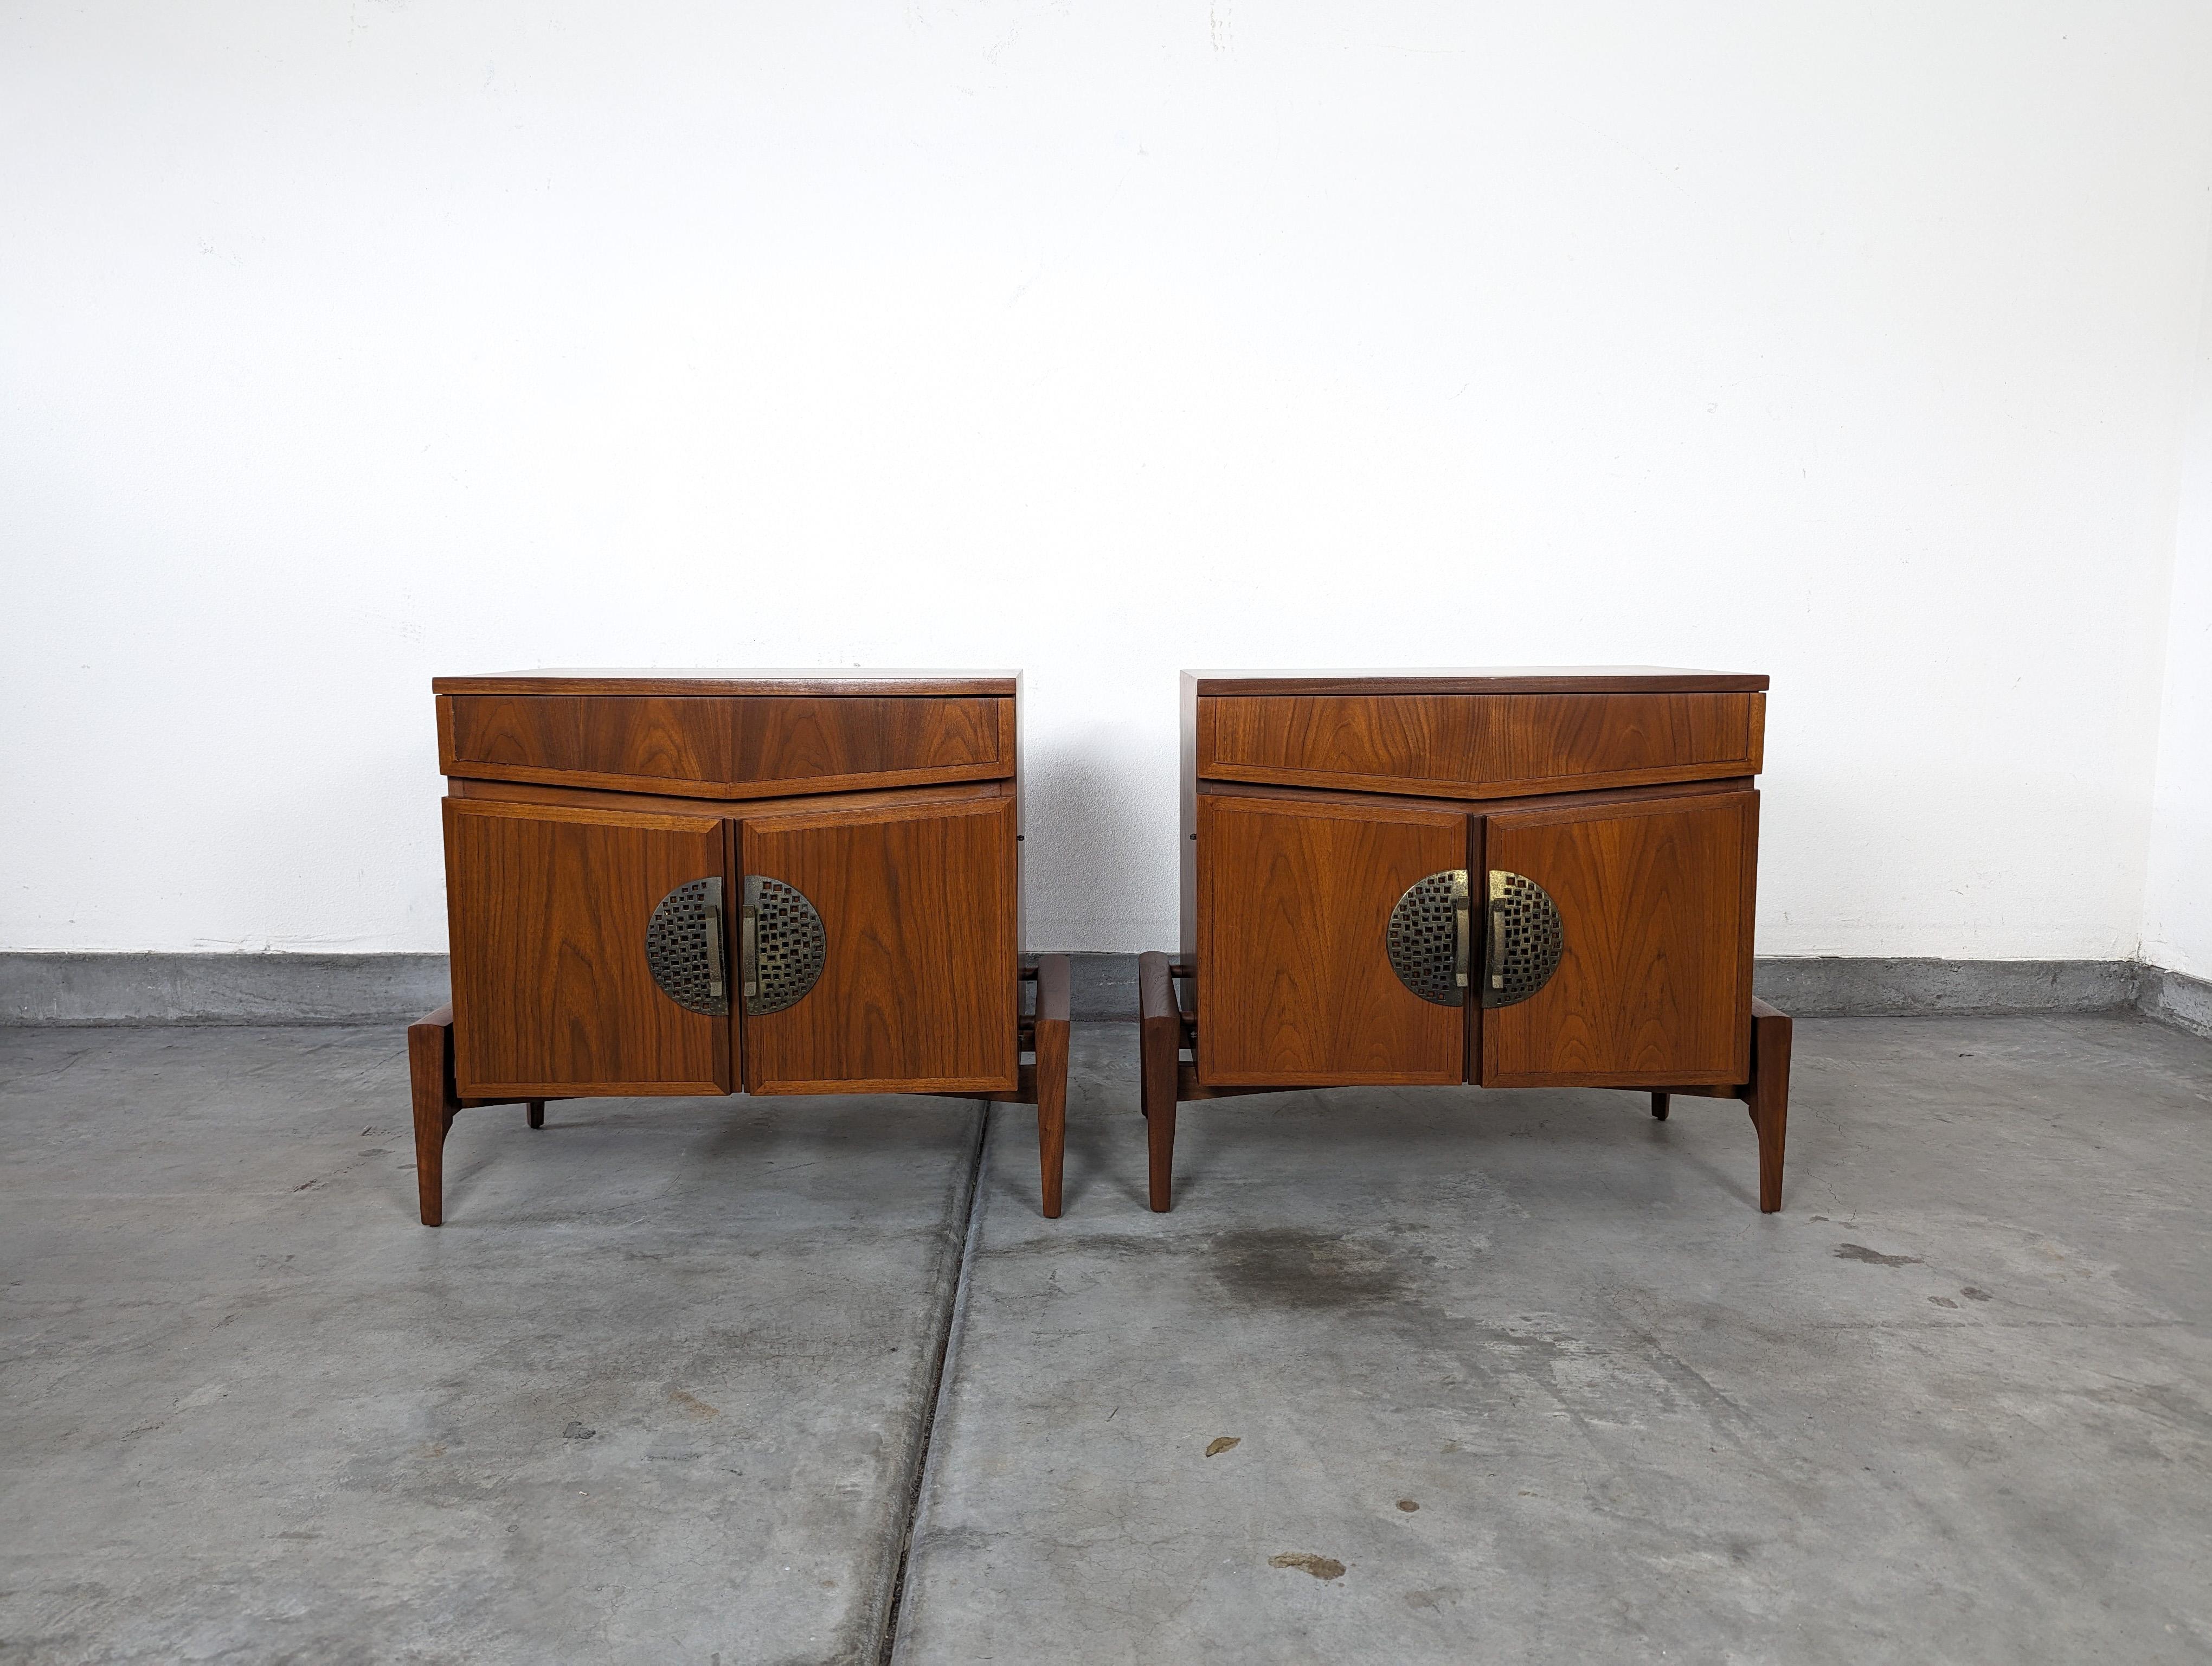 Step back in time with this stunning pair of mid-century nightstands manufactured by Baker in the 1960s. Showcasing a timeless walnut finish, these pieces will bring a touch of vintage charm to any bedroom setting. 

Designed with a unique skeletal